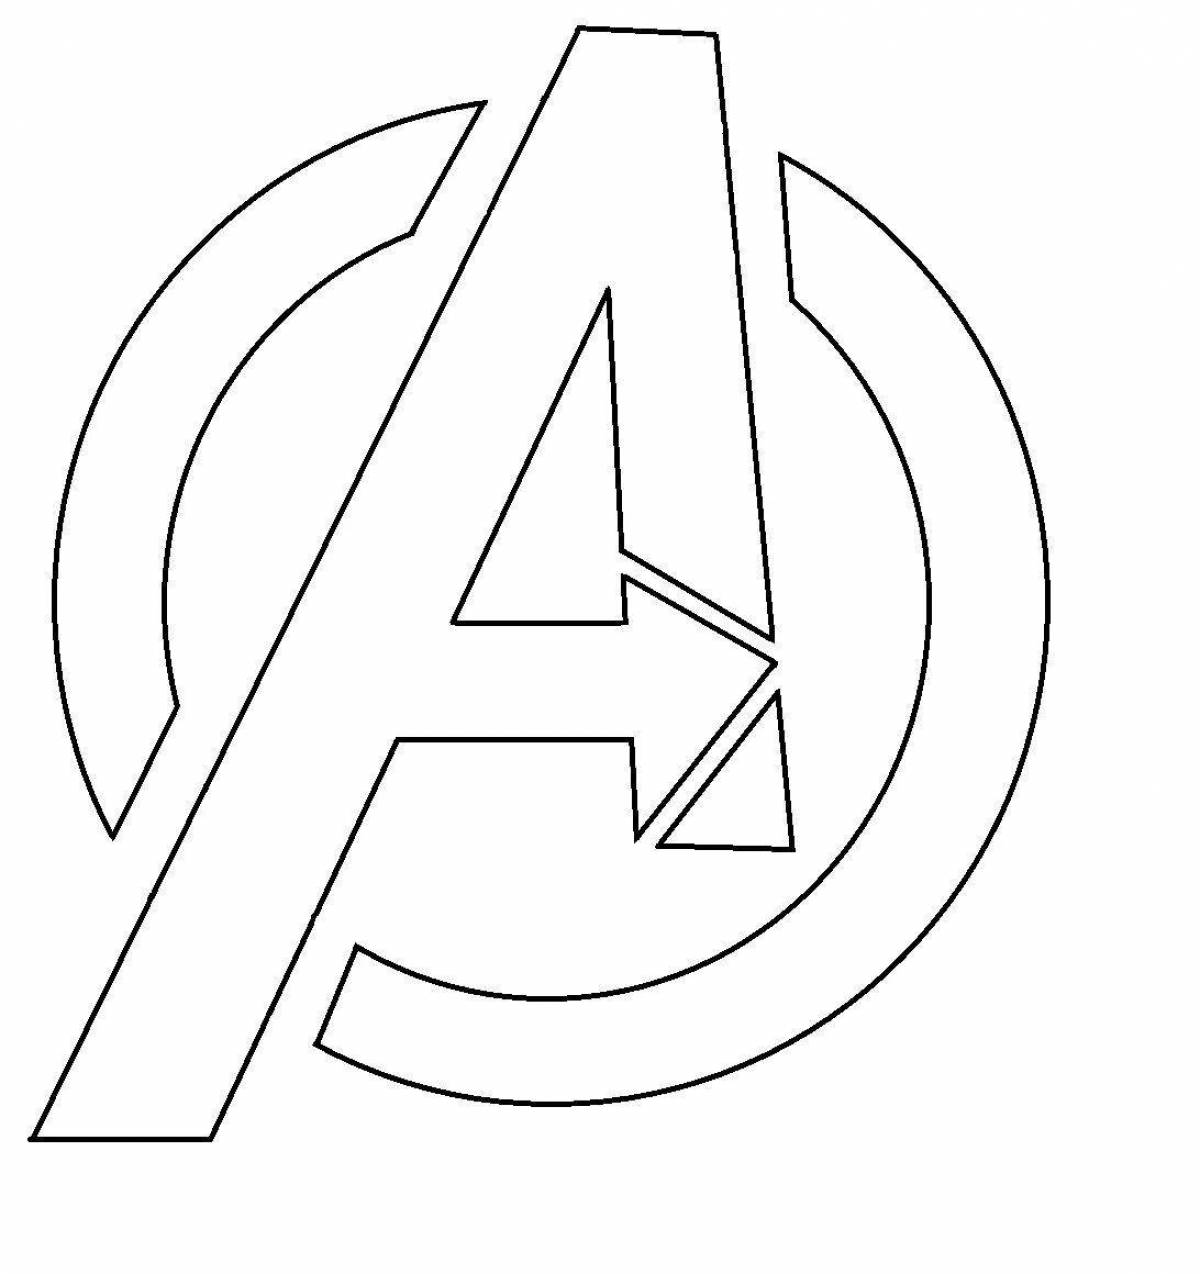 Brilliantly done marvel logo coloring page